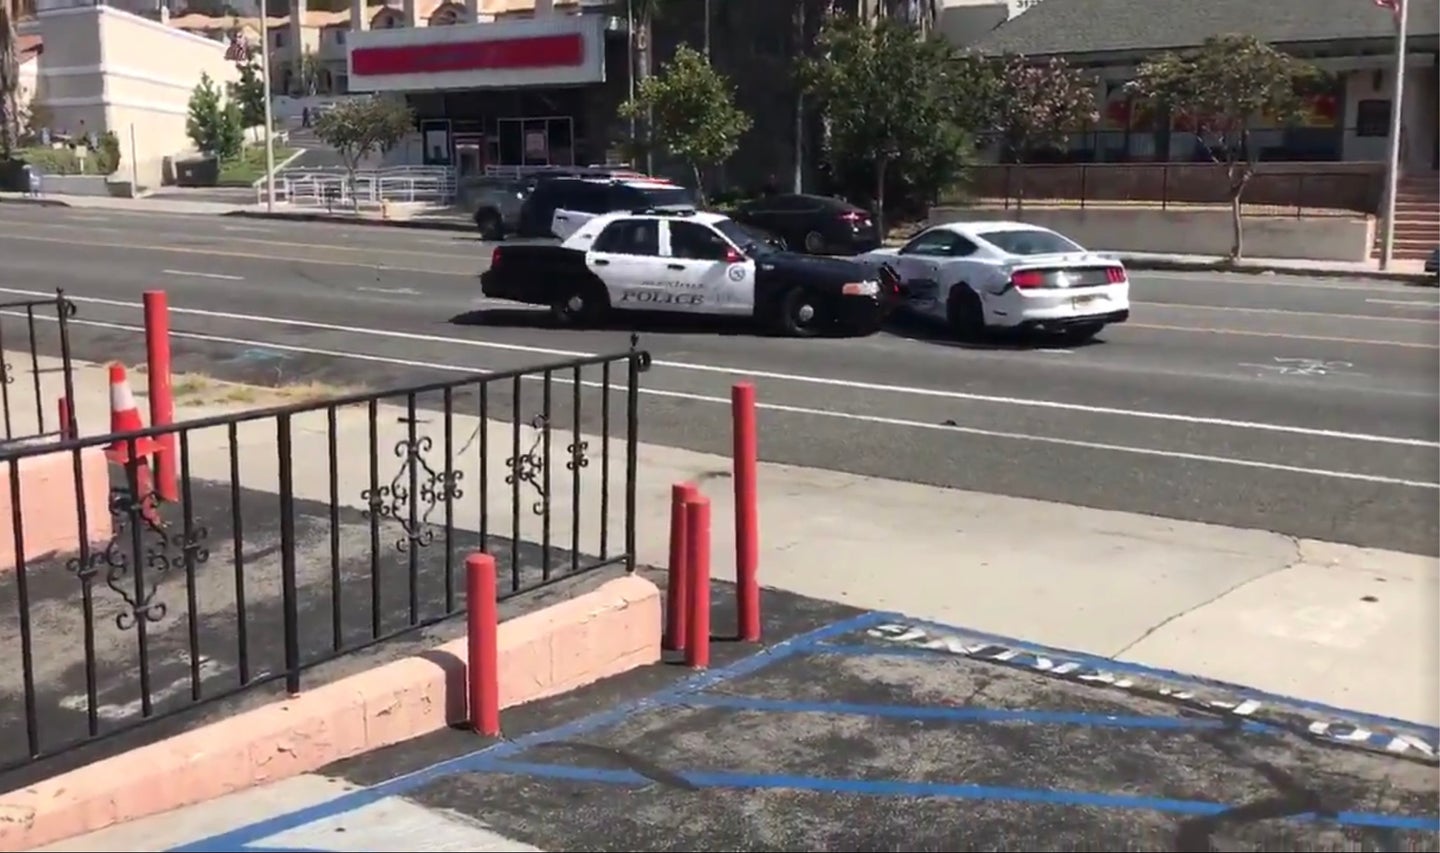 Alleged Shoplifter Rams White Ford Mustang Into Police, Evades Capture